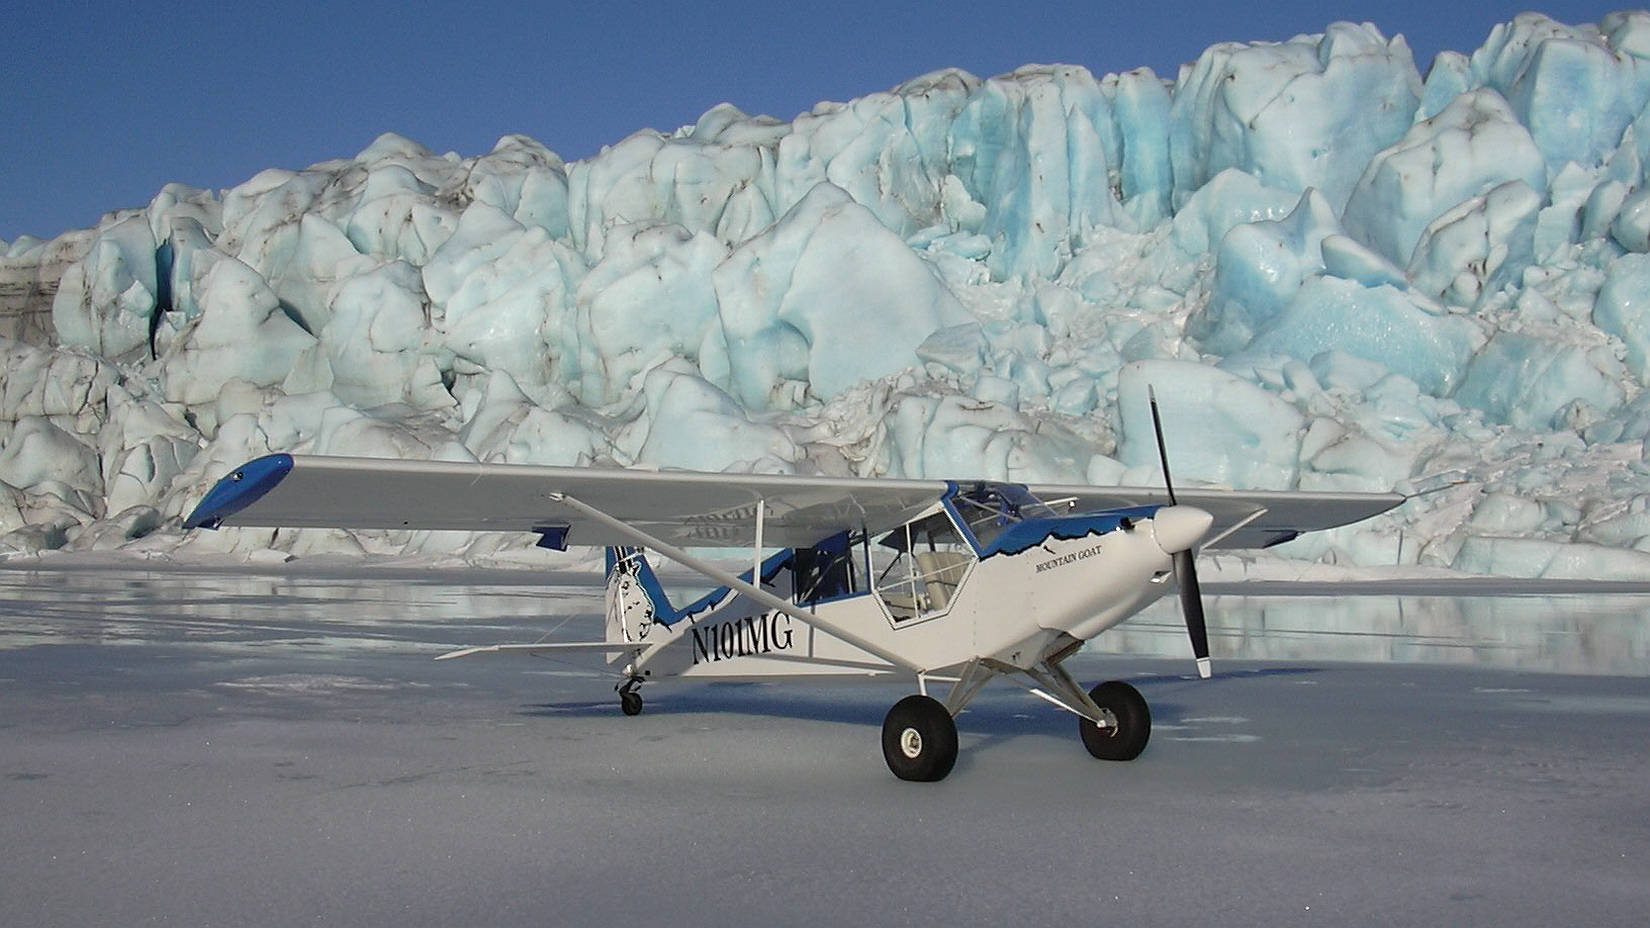 Small White Hd Plane In Ice Background